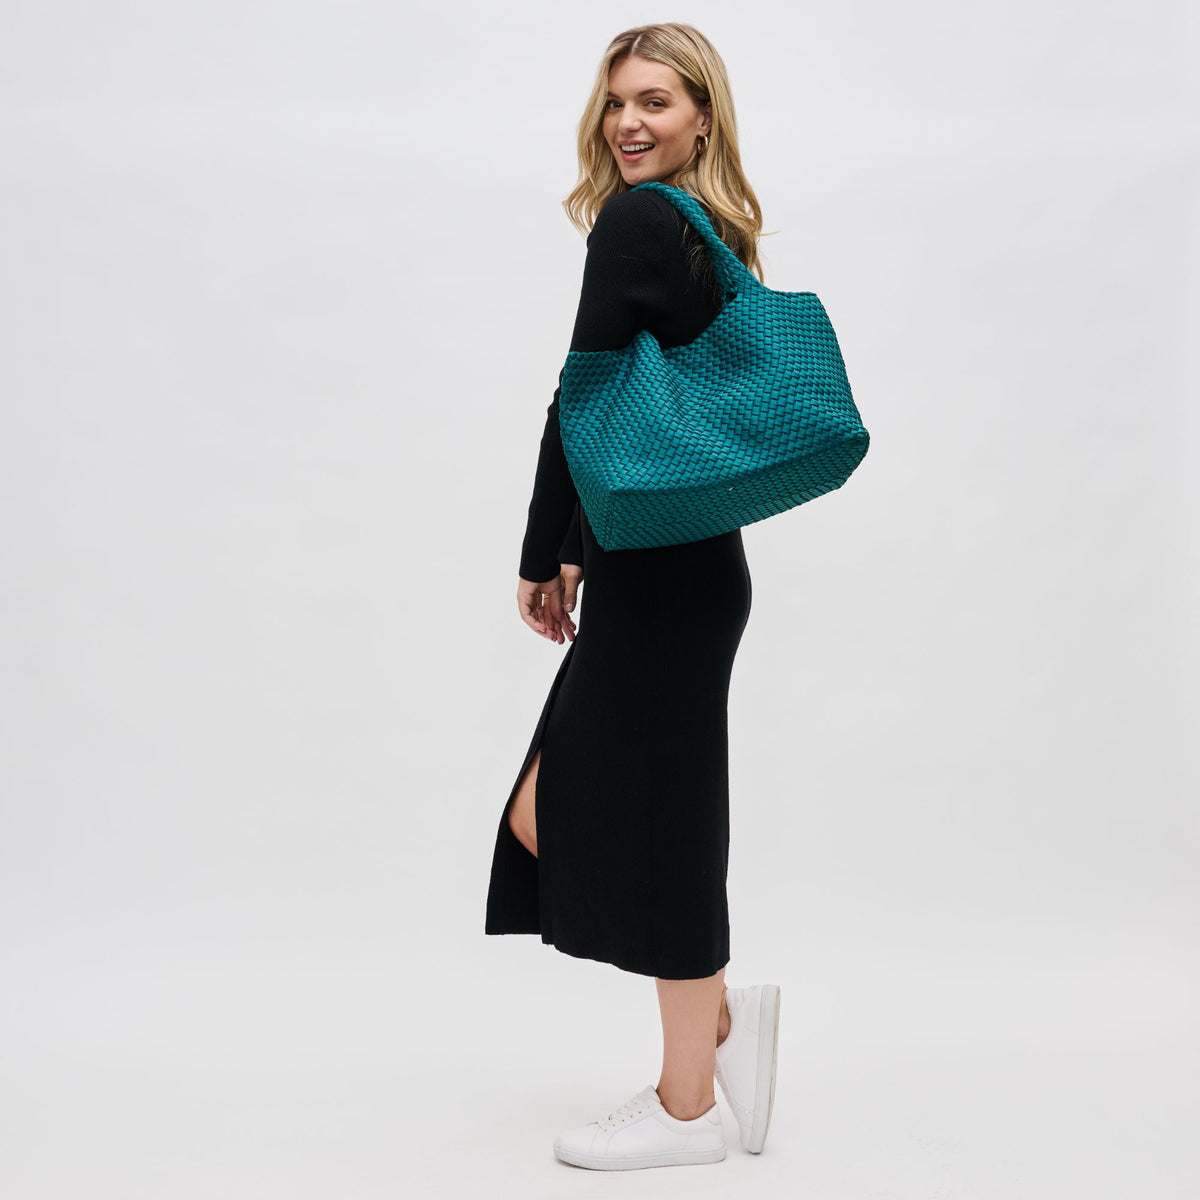 Woman wearing Forest Sol and Selene Sky's The Limit - Large Tote 841764108232 View 2 | Forest